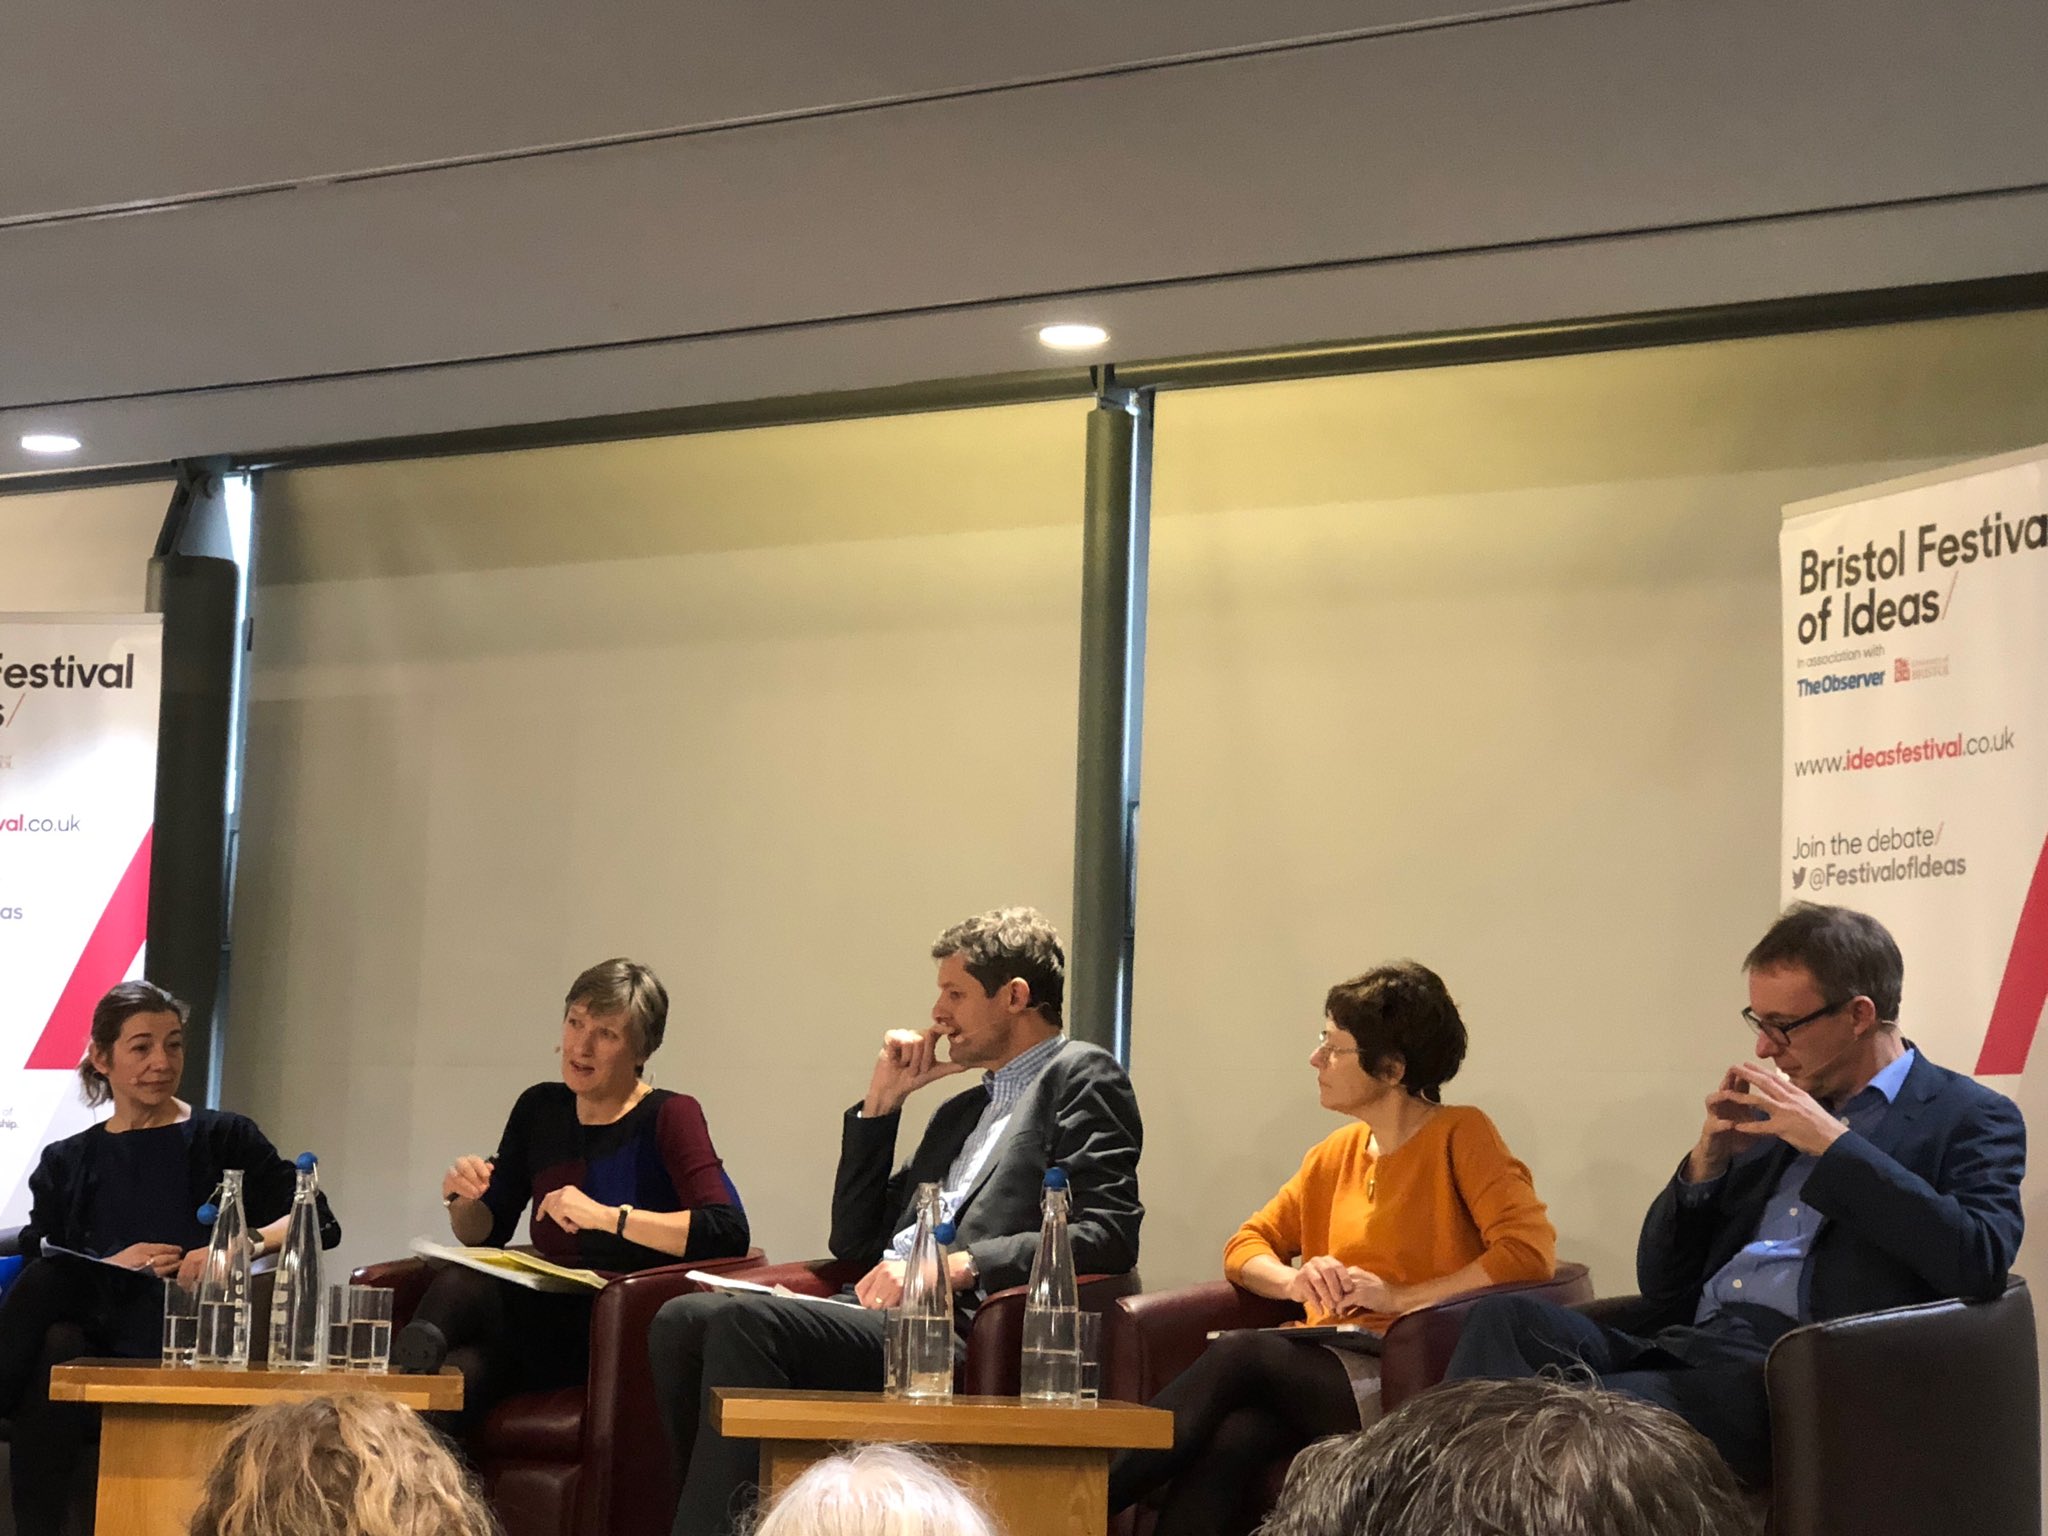 The #economicsfest panel on the NHS is being chaired by my young BBC colleague @BBCHughPym https://t.co/XBRJuYMyGB